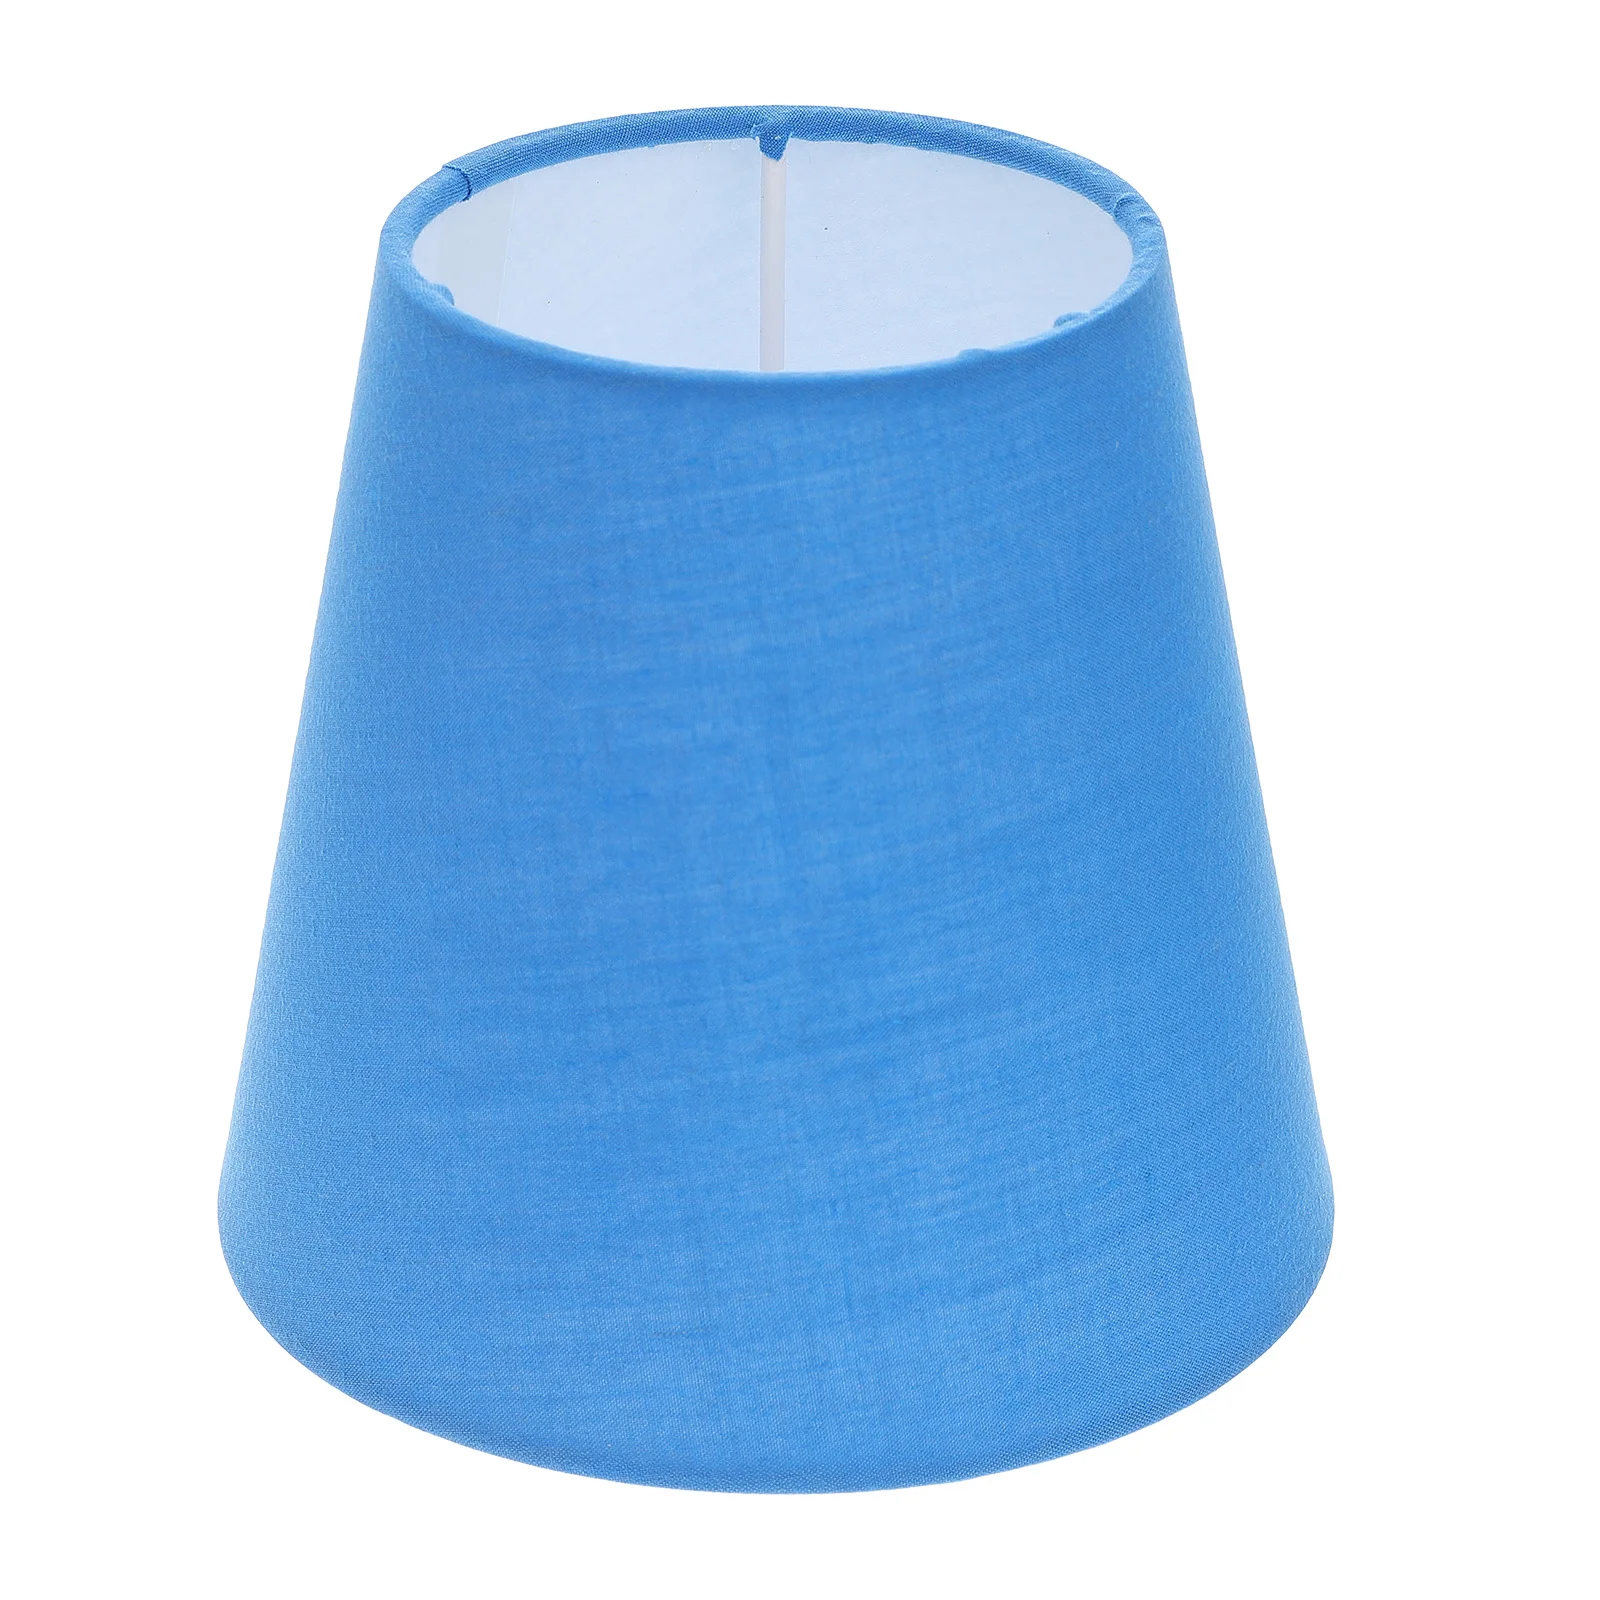 

Fabric Lamp Shade Replacement Cone Barrel Lampshade E14 Clip Bulb Barrel Light Cover Tabletop Light Shade Light Bulb Cover